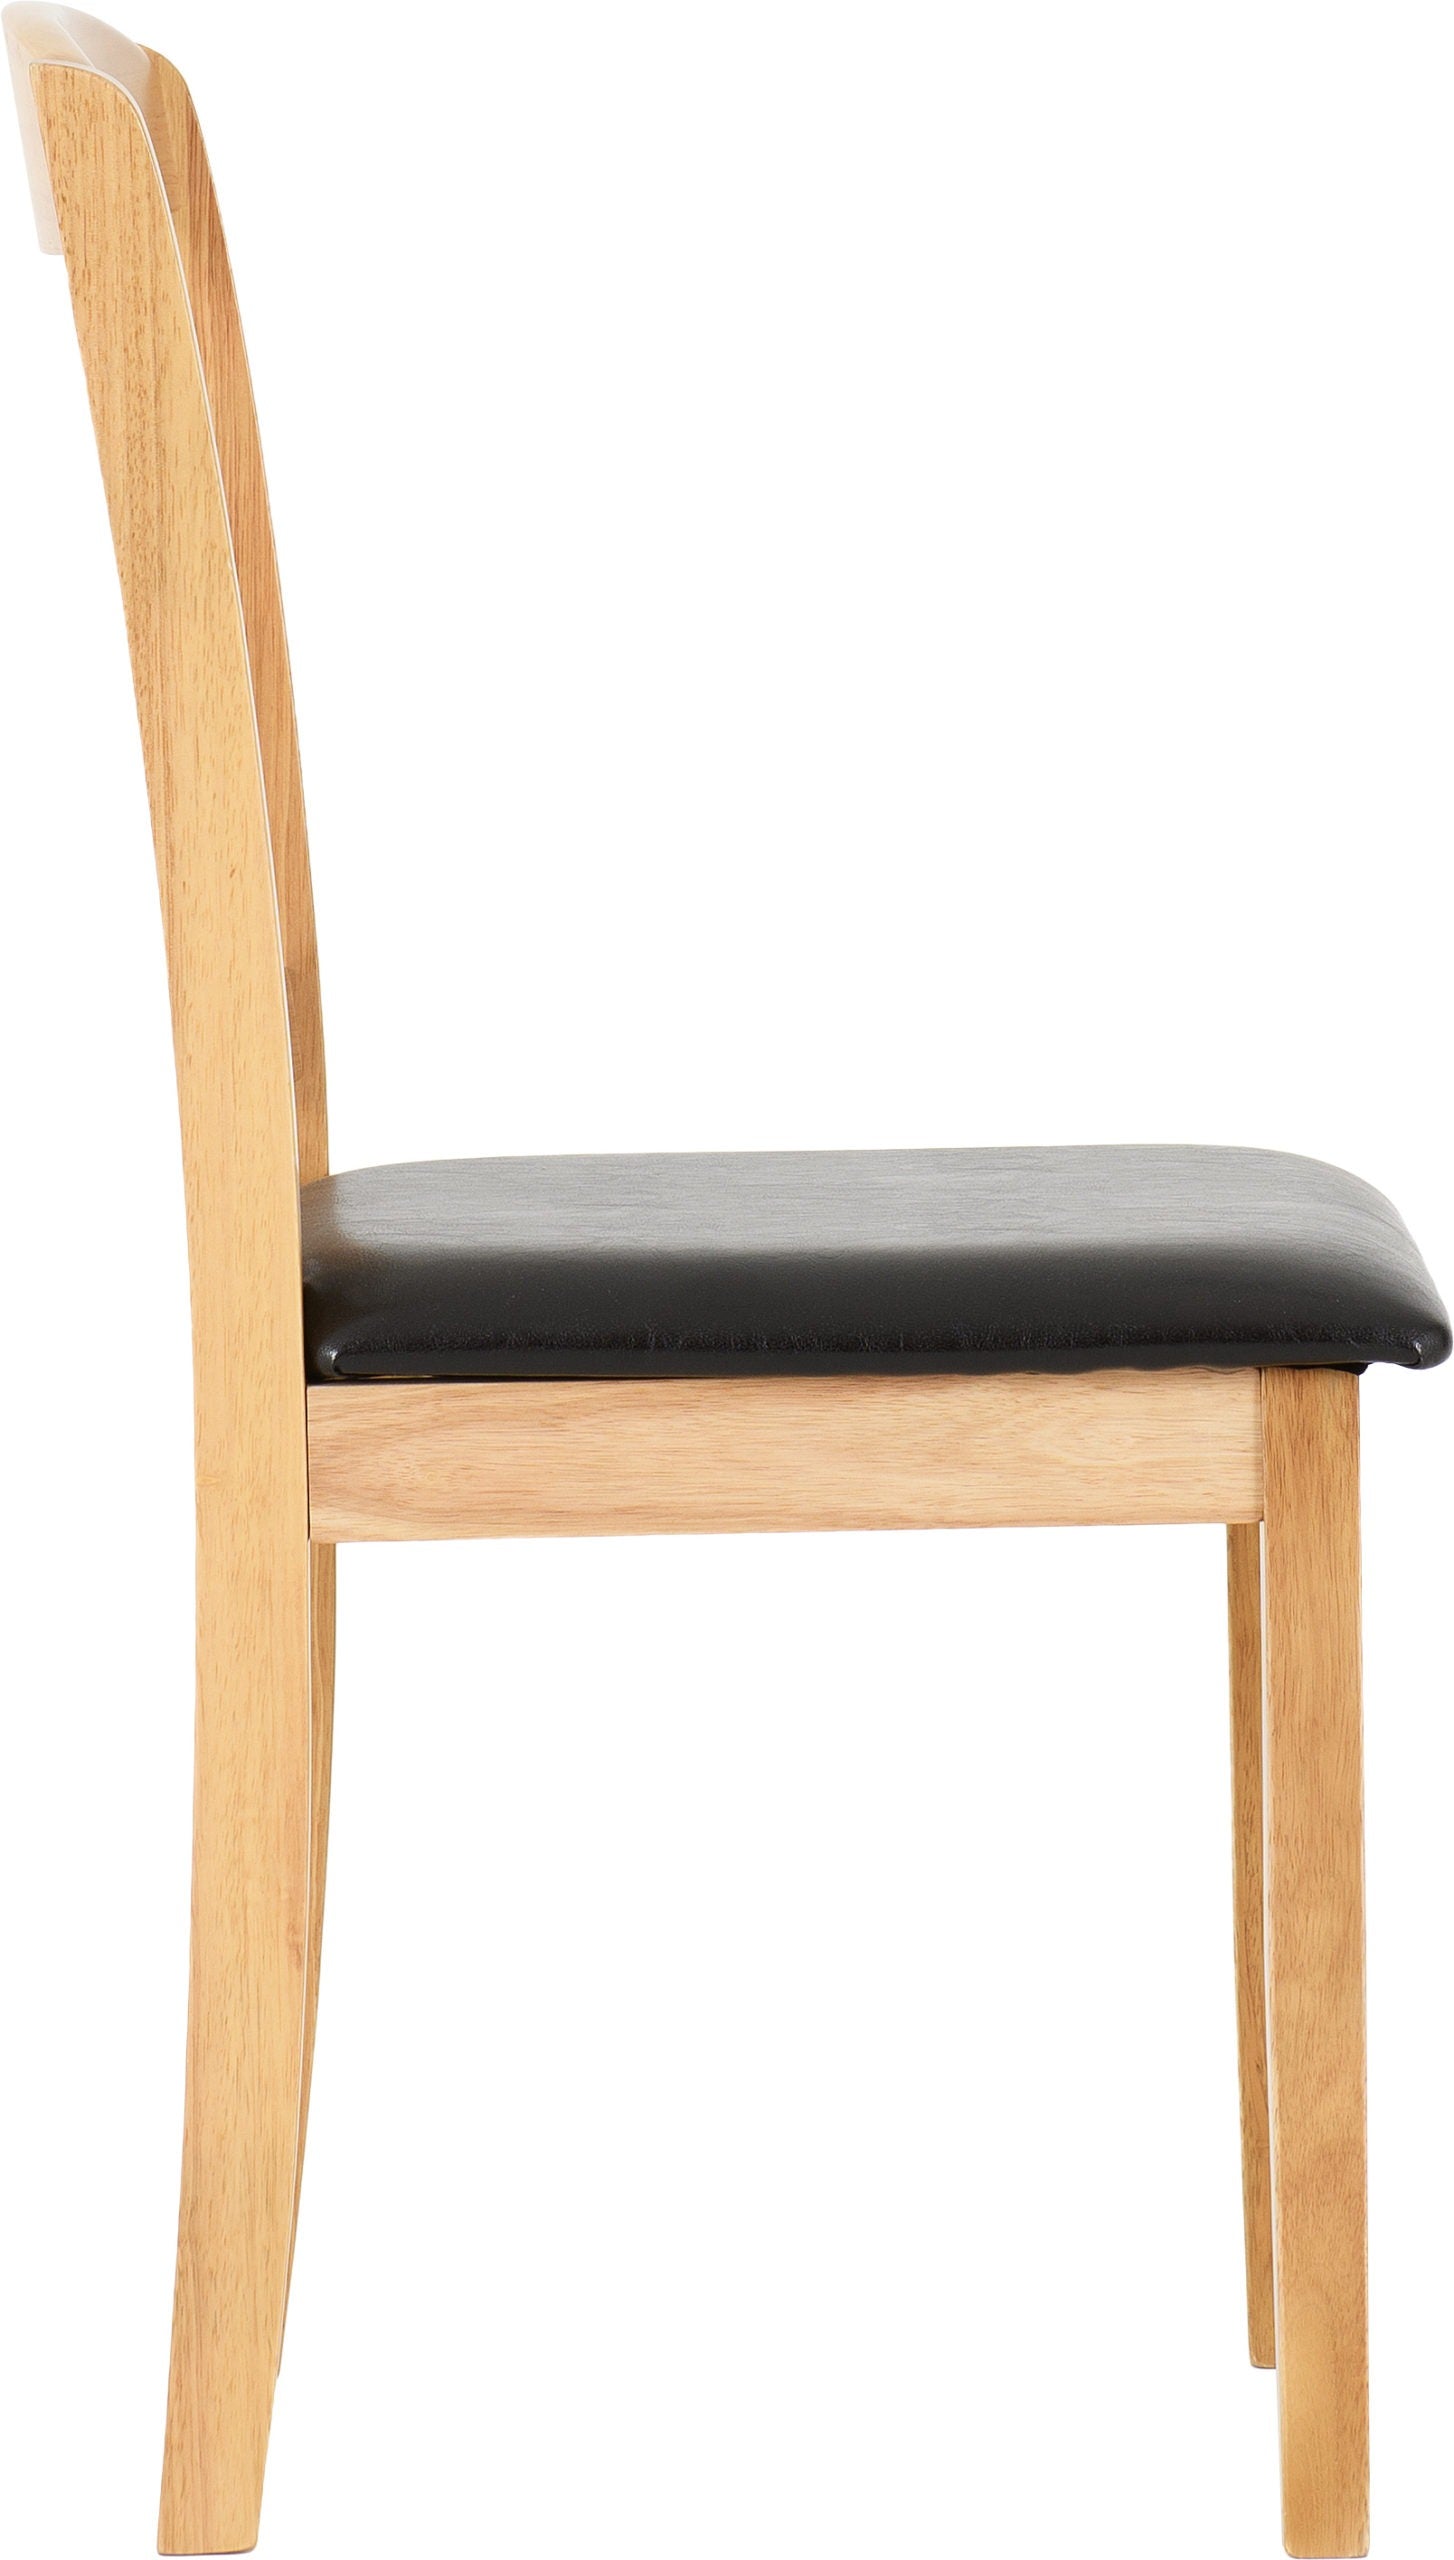 Mason Dining Chair Pair in Oak Varnish and Brown Faux Leather